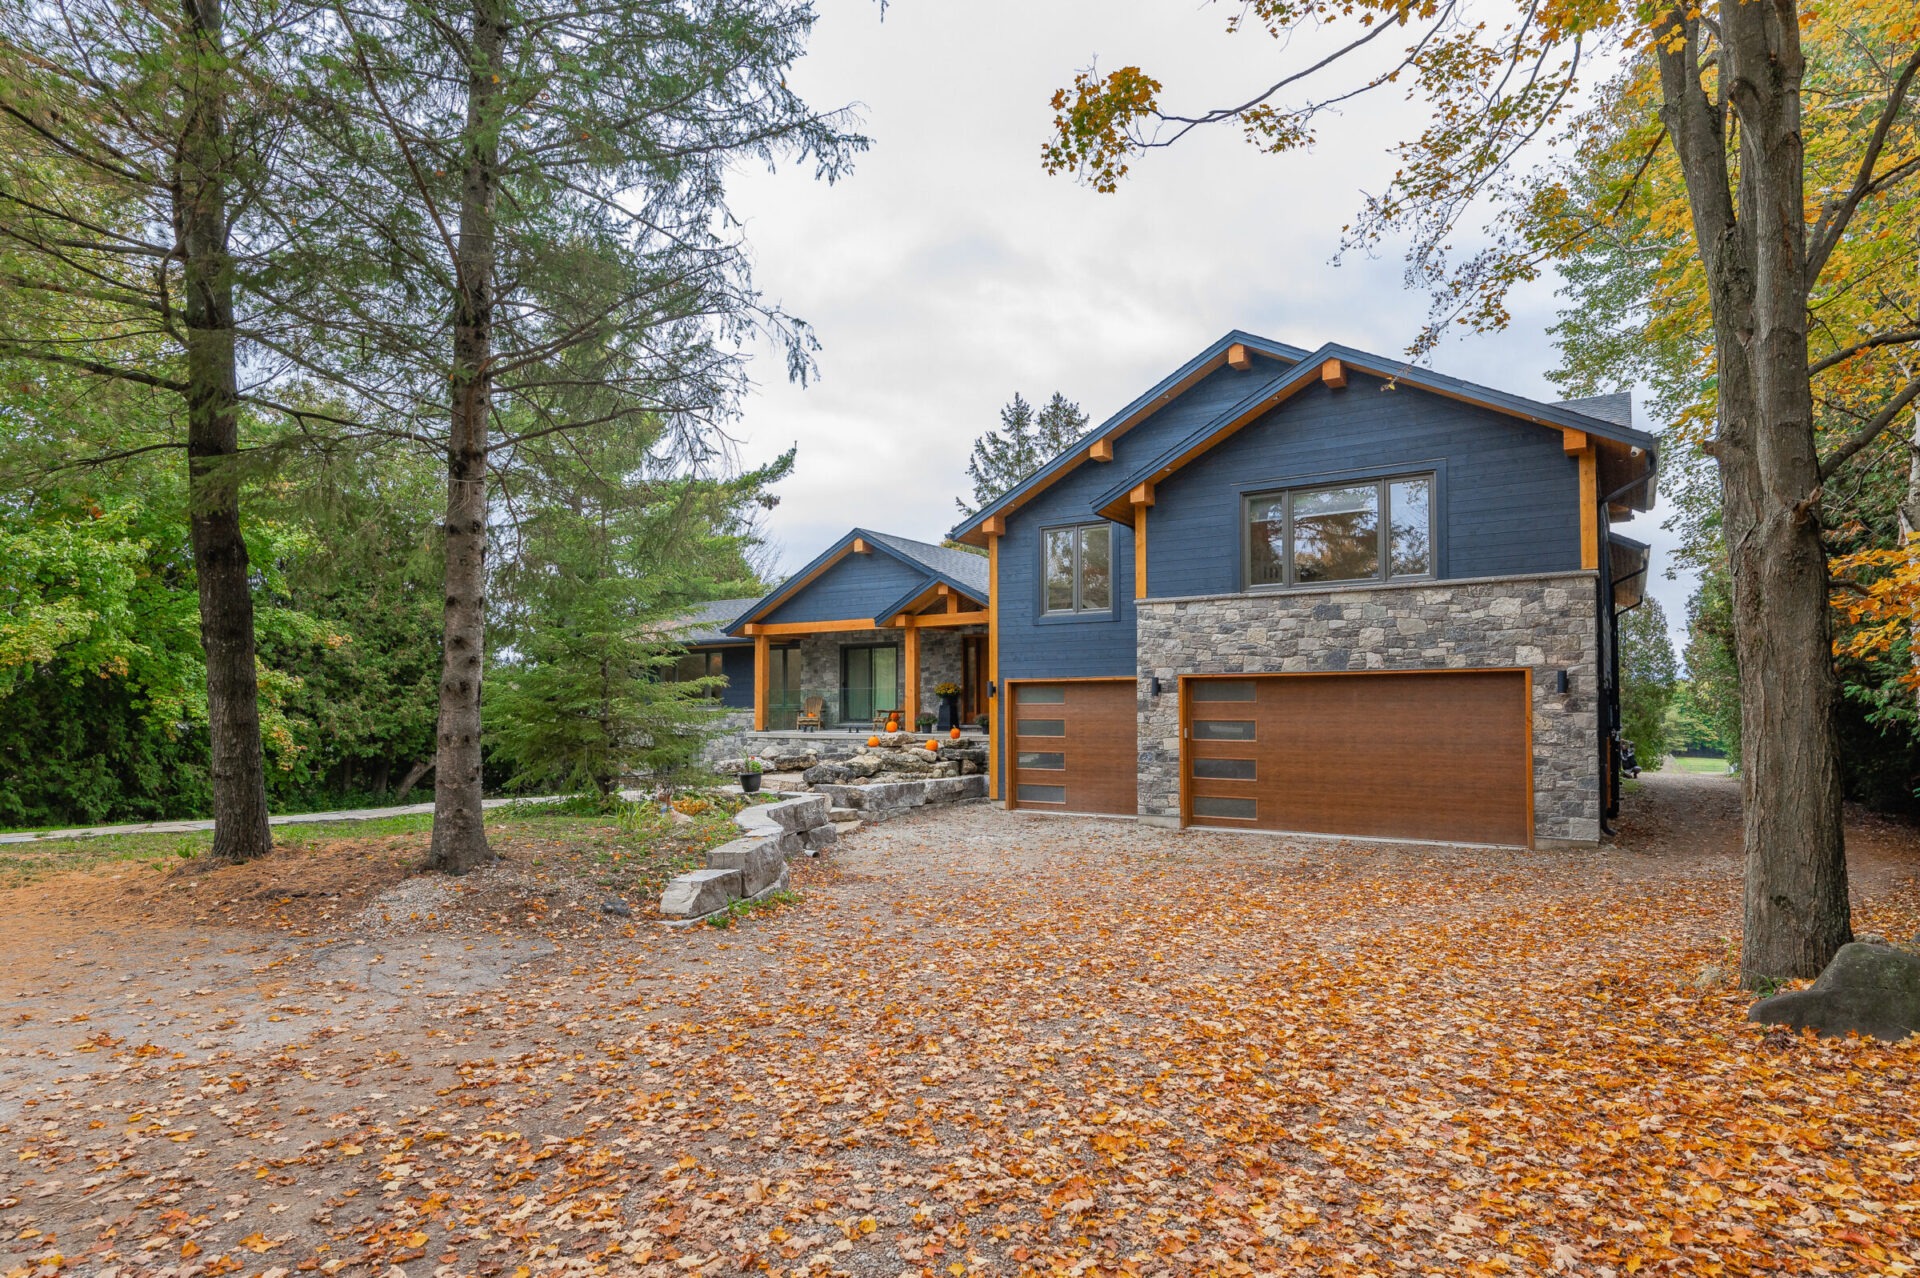 Modern two-story house with dark blue and stone facade, garage, surrounded by trees, with a driveway covered in fallen orange autumn leaves.